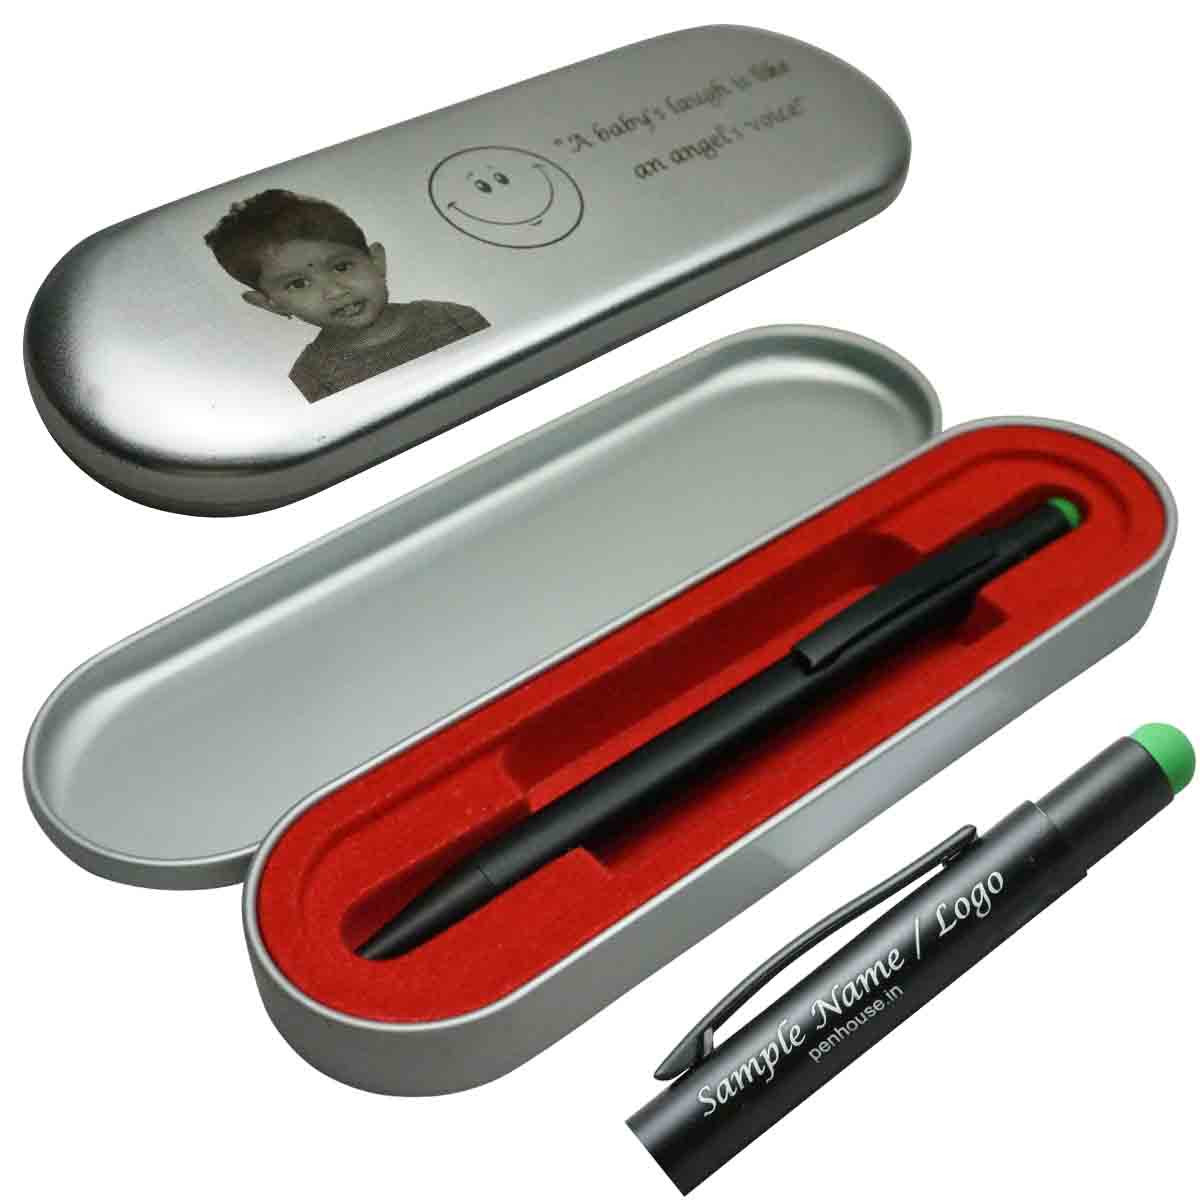 penhouse_M5GS Black Body and Green Stylus Click Pen with customization Model 18589